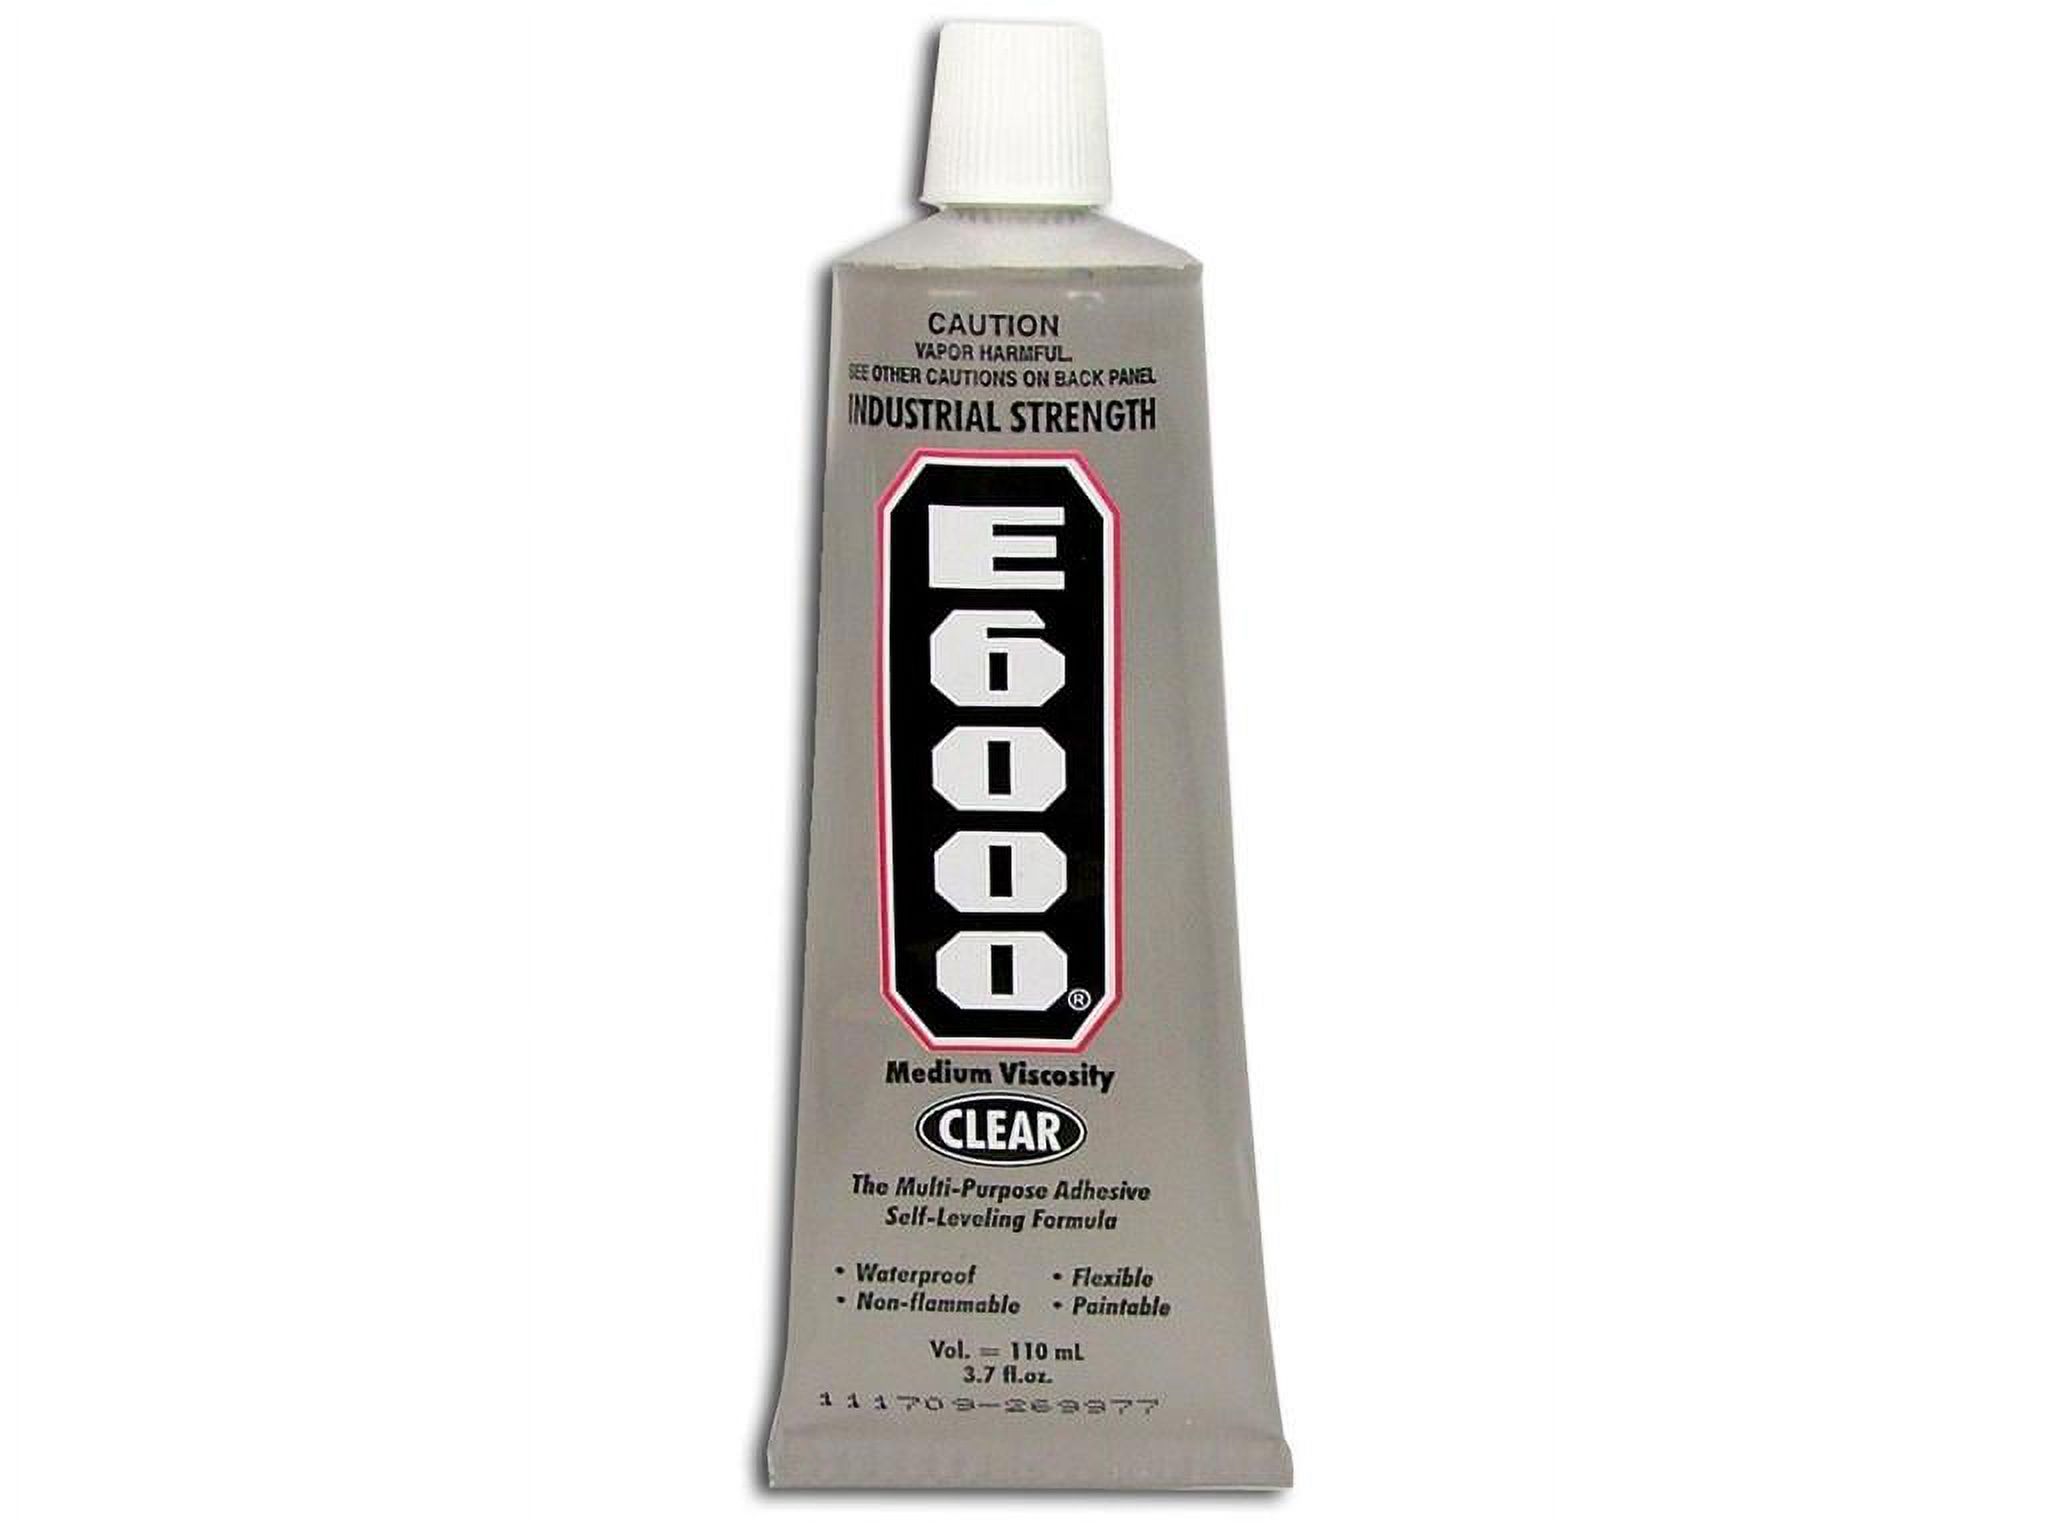 Eclectic E-6000 Adhesive, 3.75 oz. - image 1 of 2